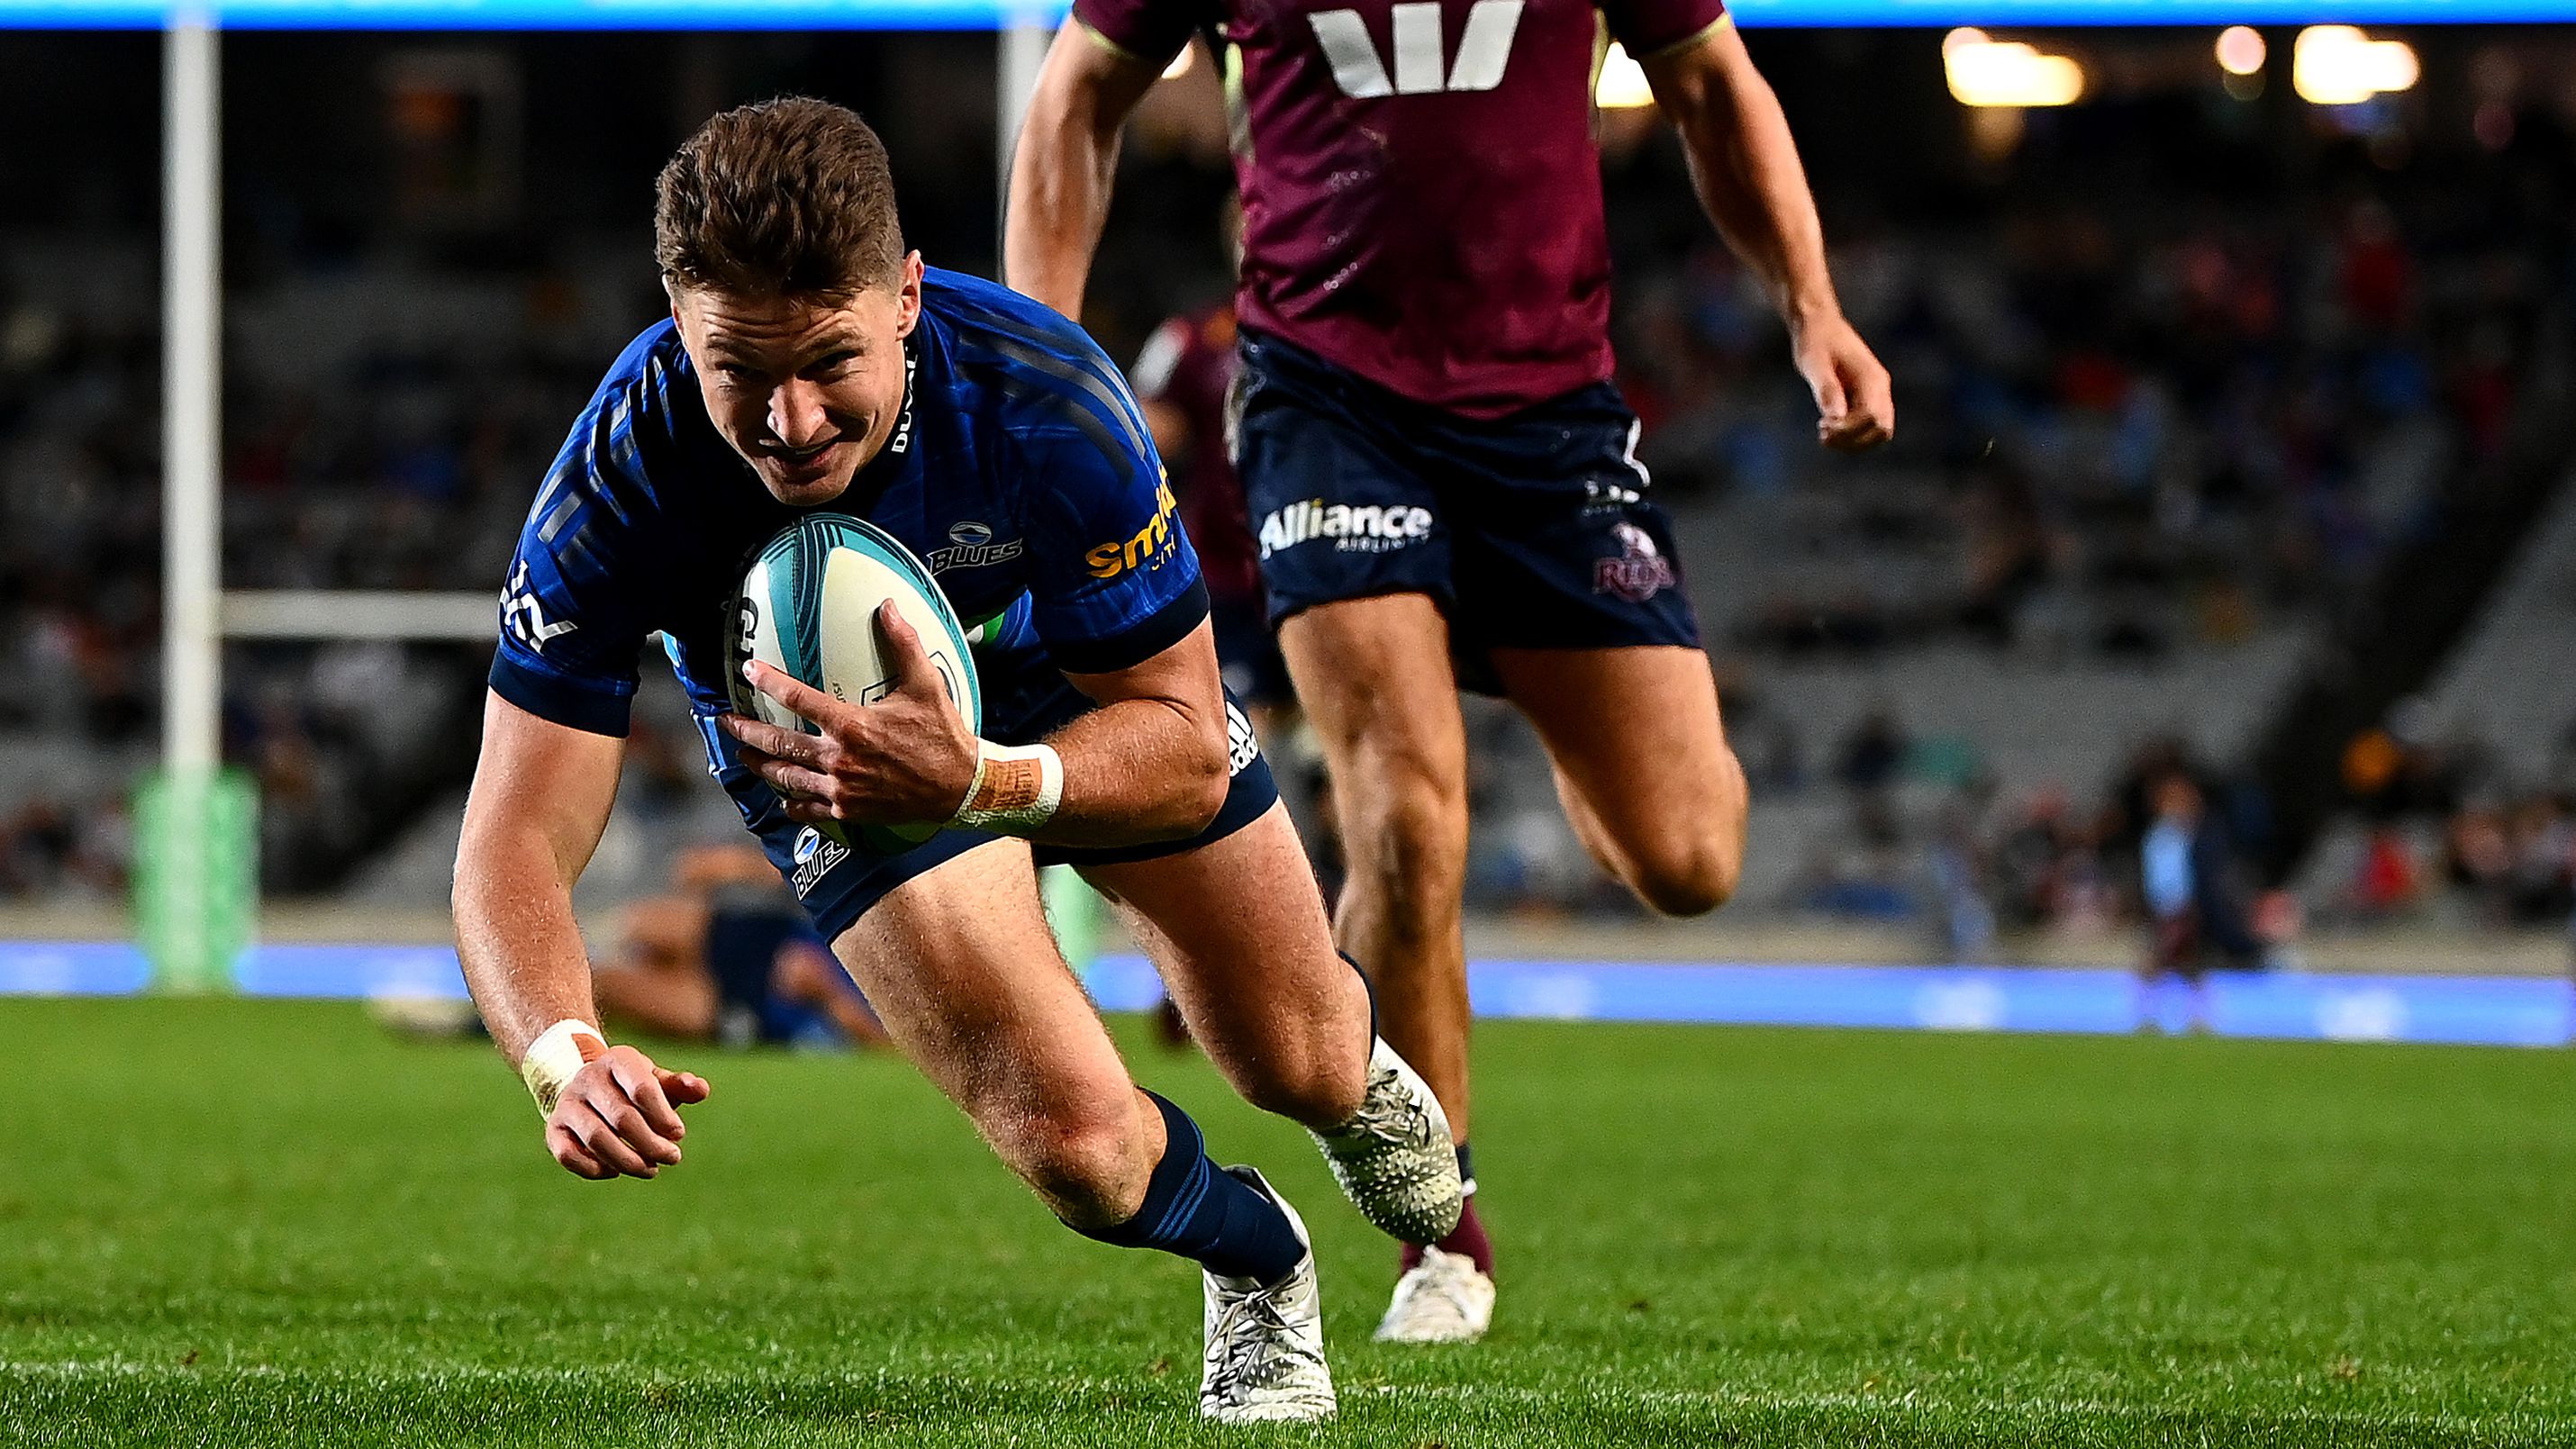 Blues trample Reds 53-26 to tighten grip on Super Rugby Pacific top spot